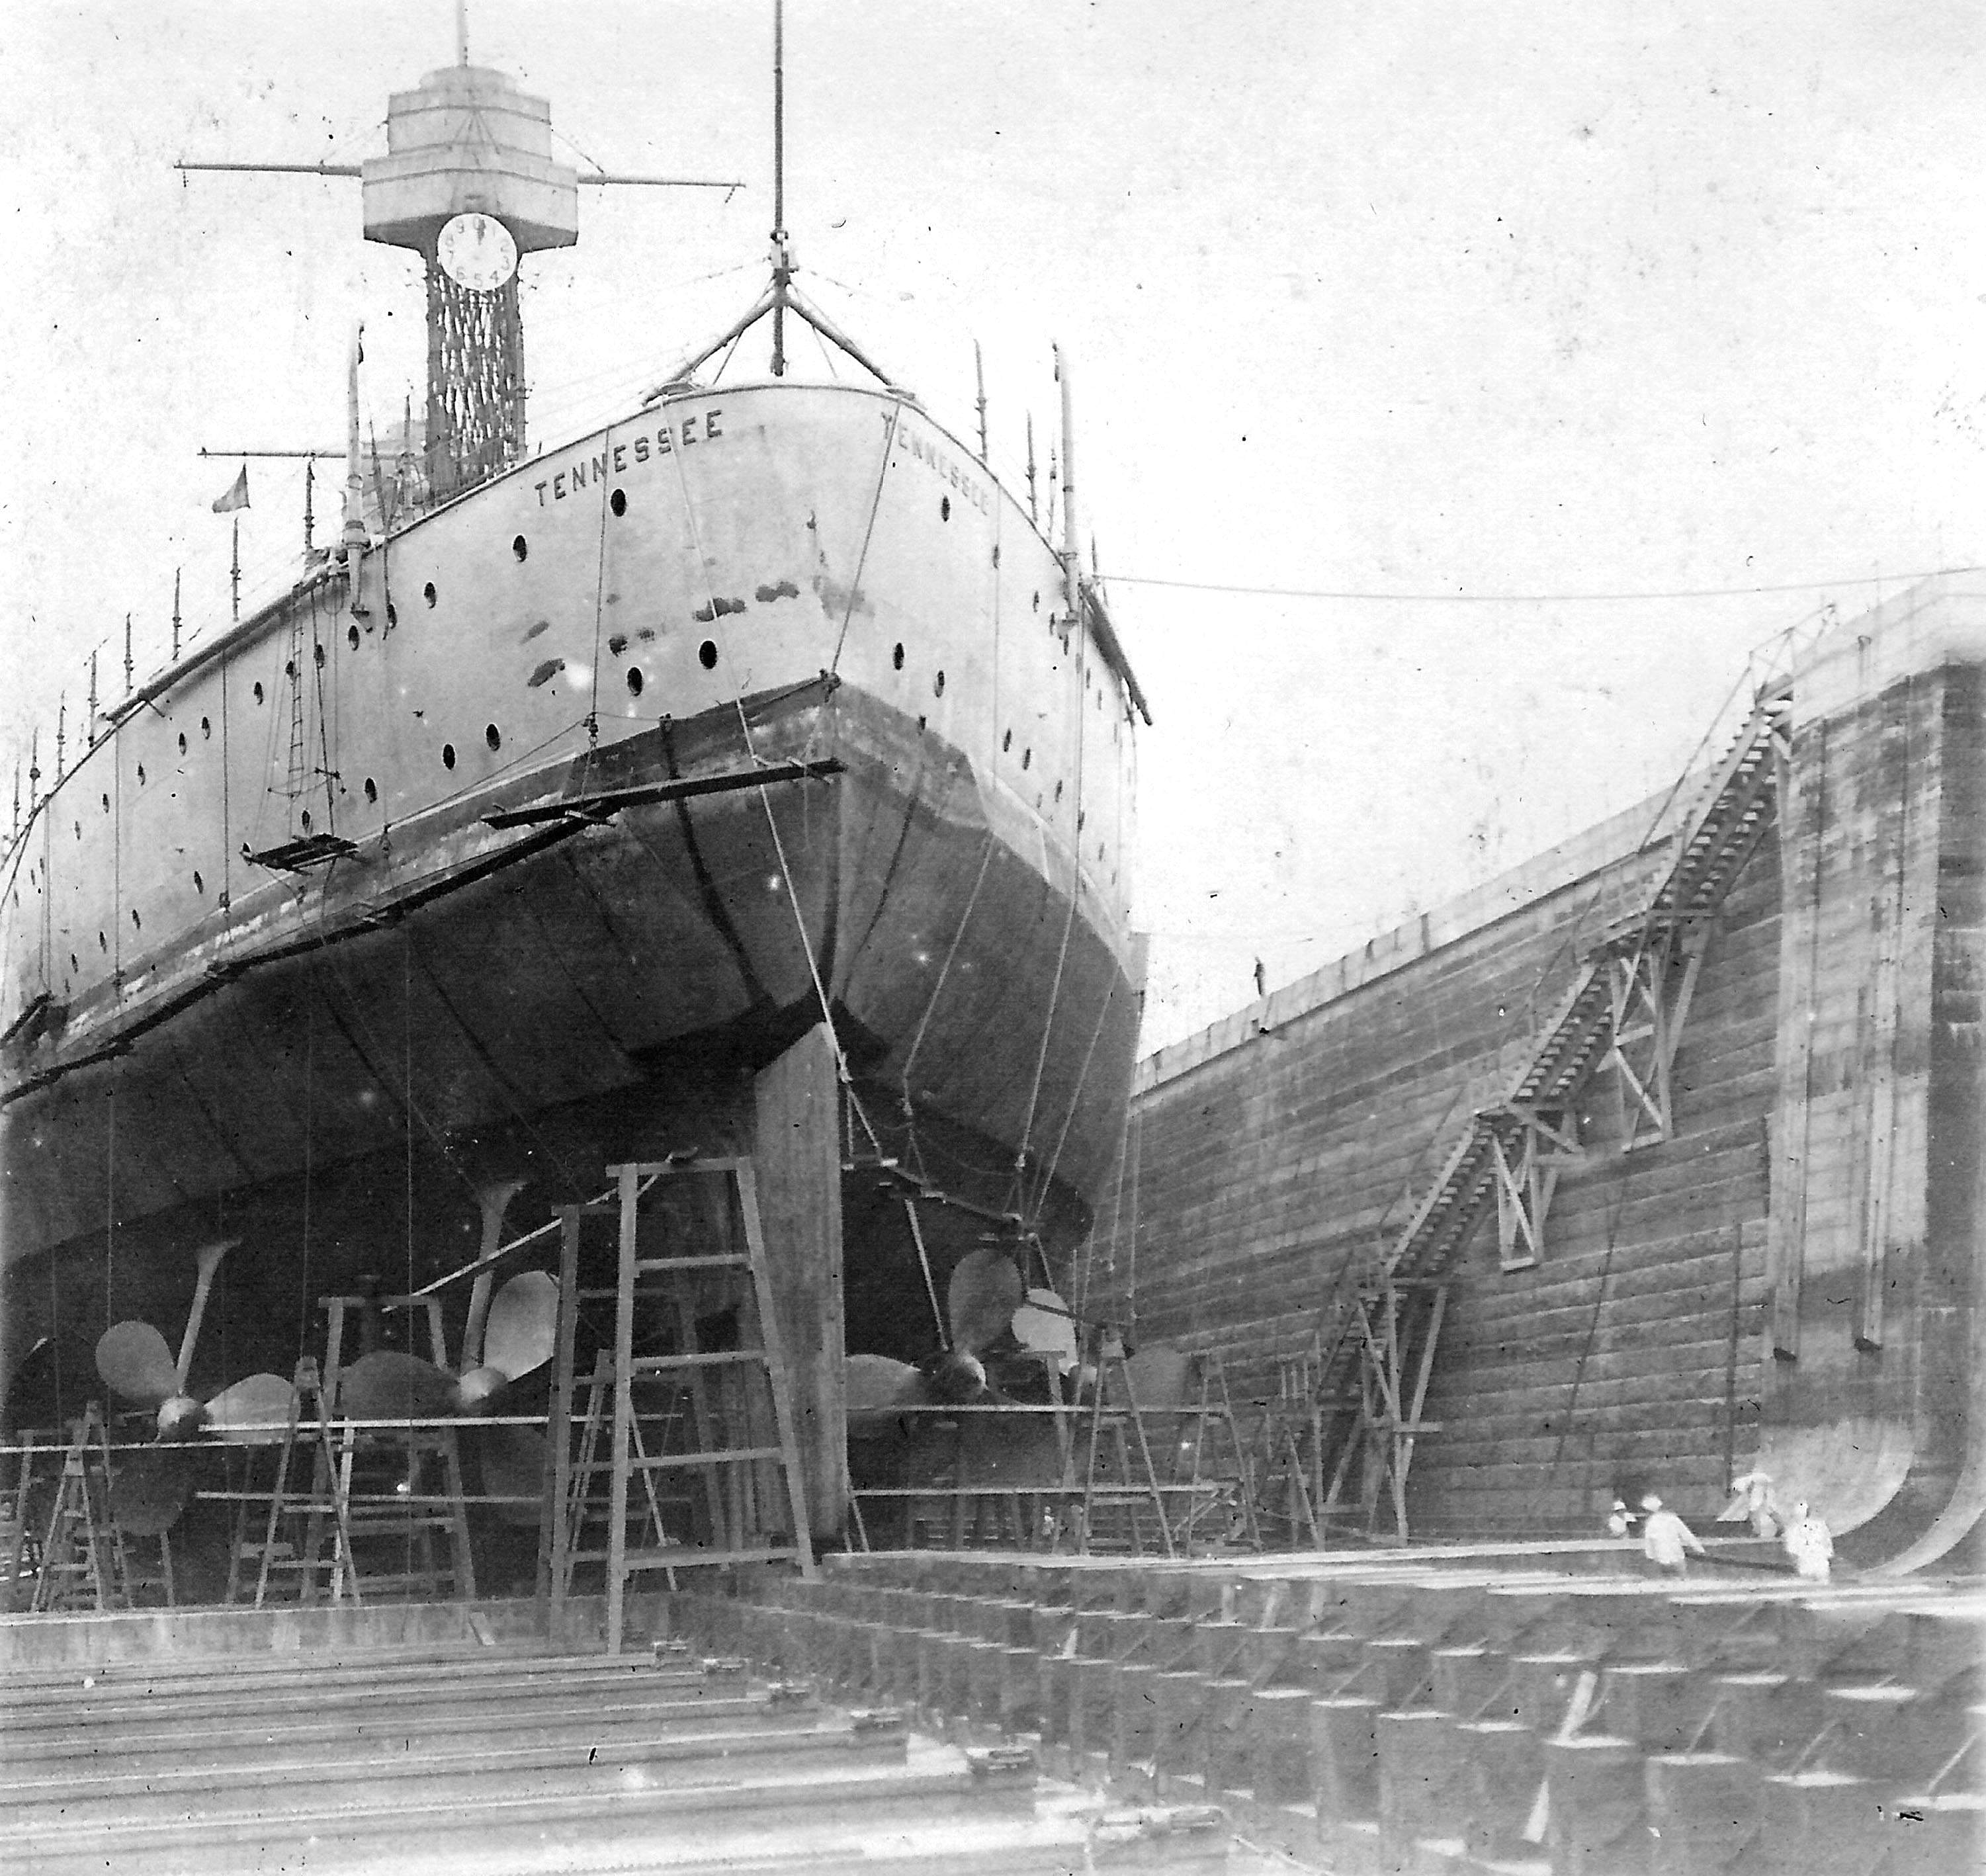 Battleship USS Tennessee in drydock at the Puget Sound Naval Shipyard, Bremerton, Washington, United States, late in 1921.